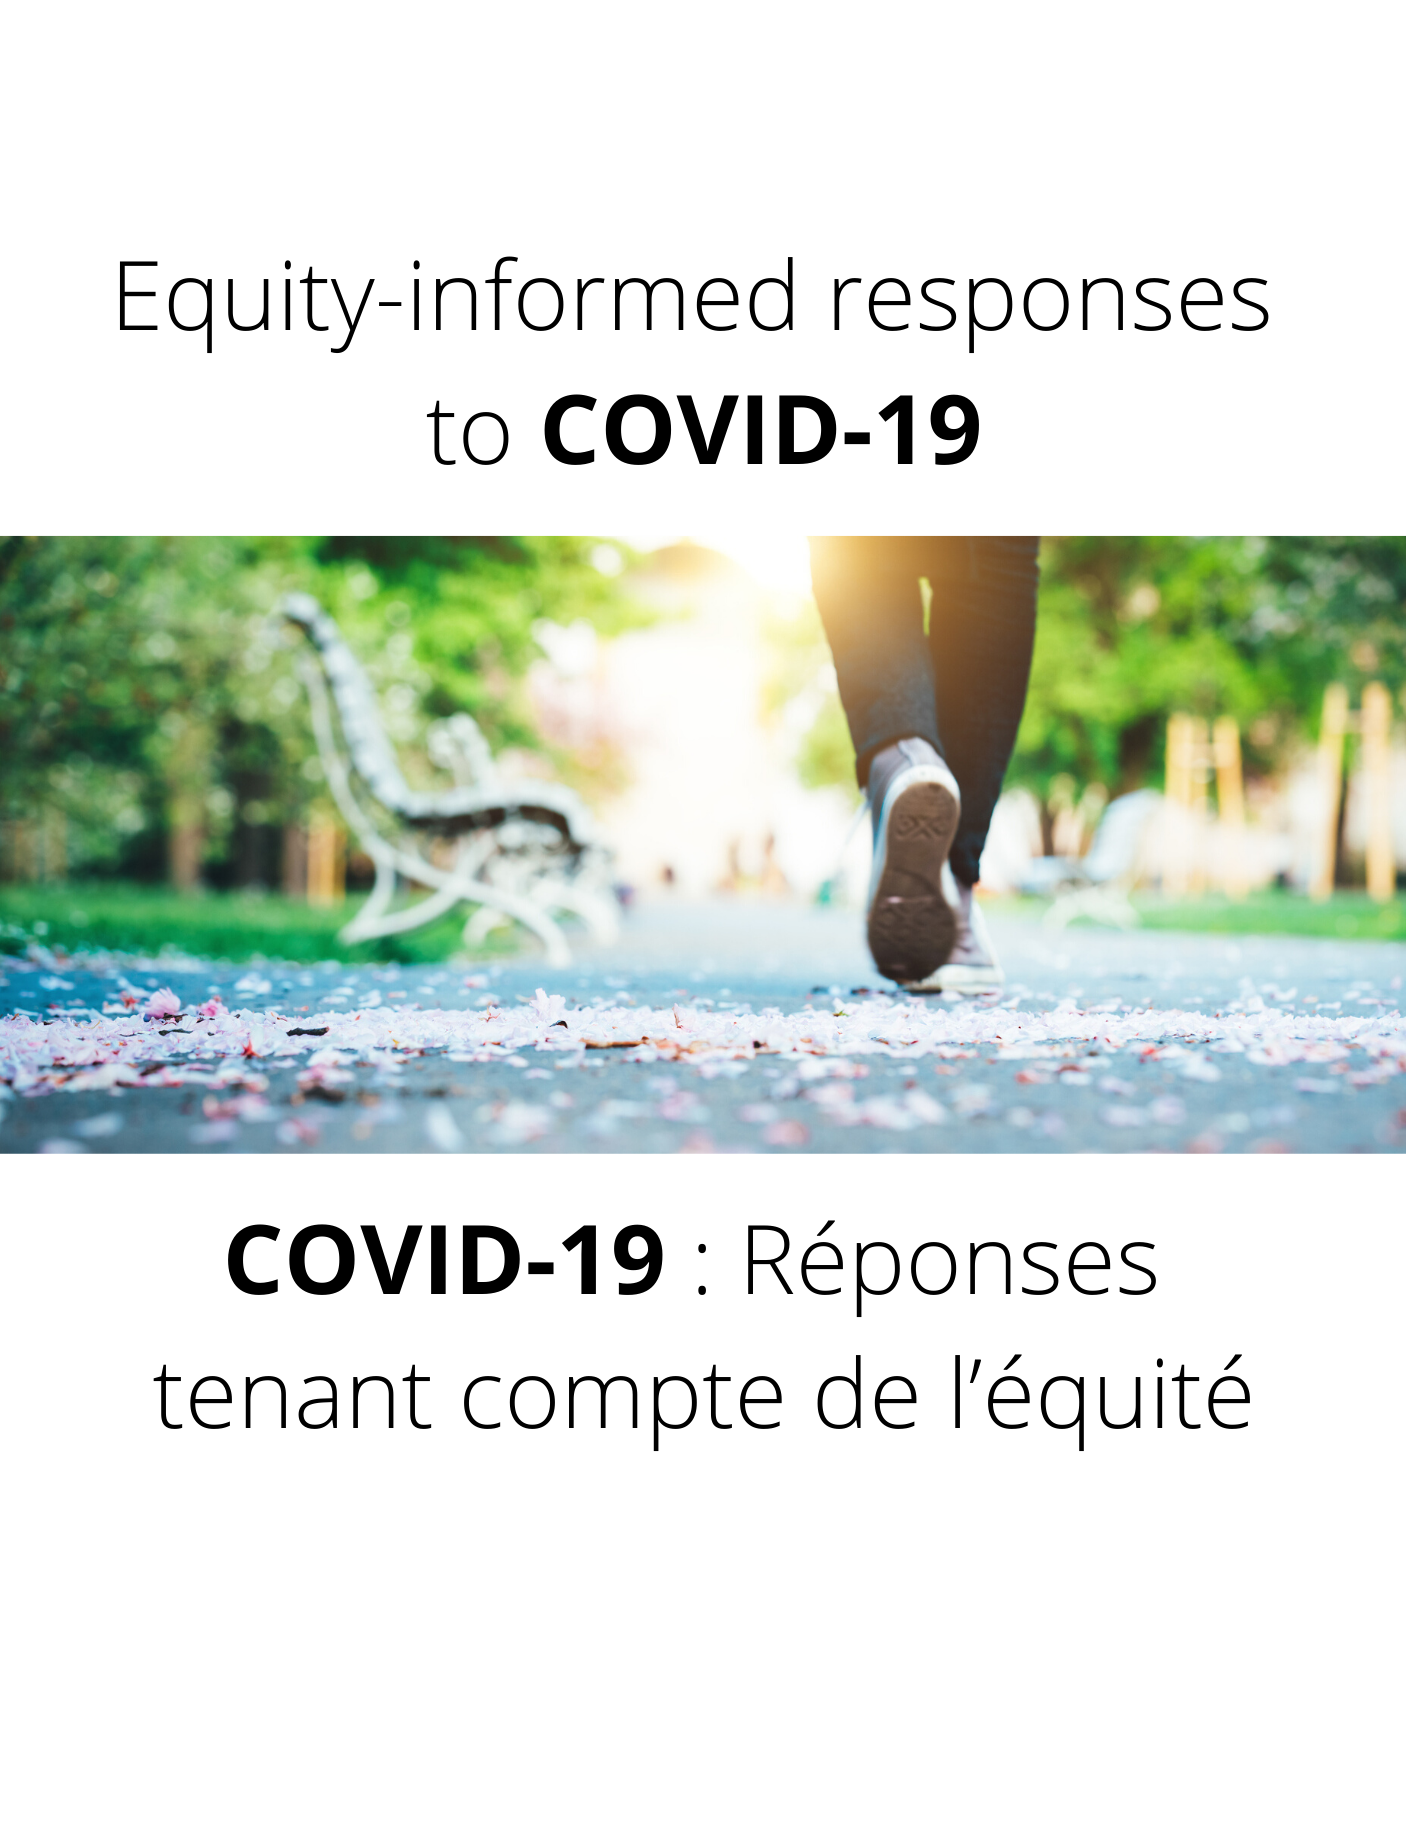 COVID-19 – what we know so far about… social determinants of health